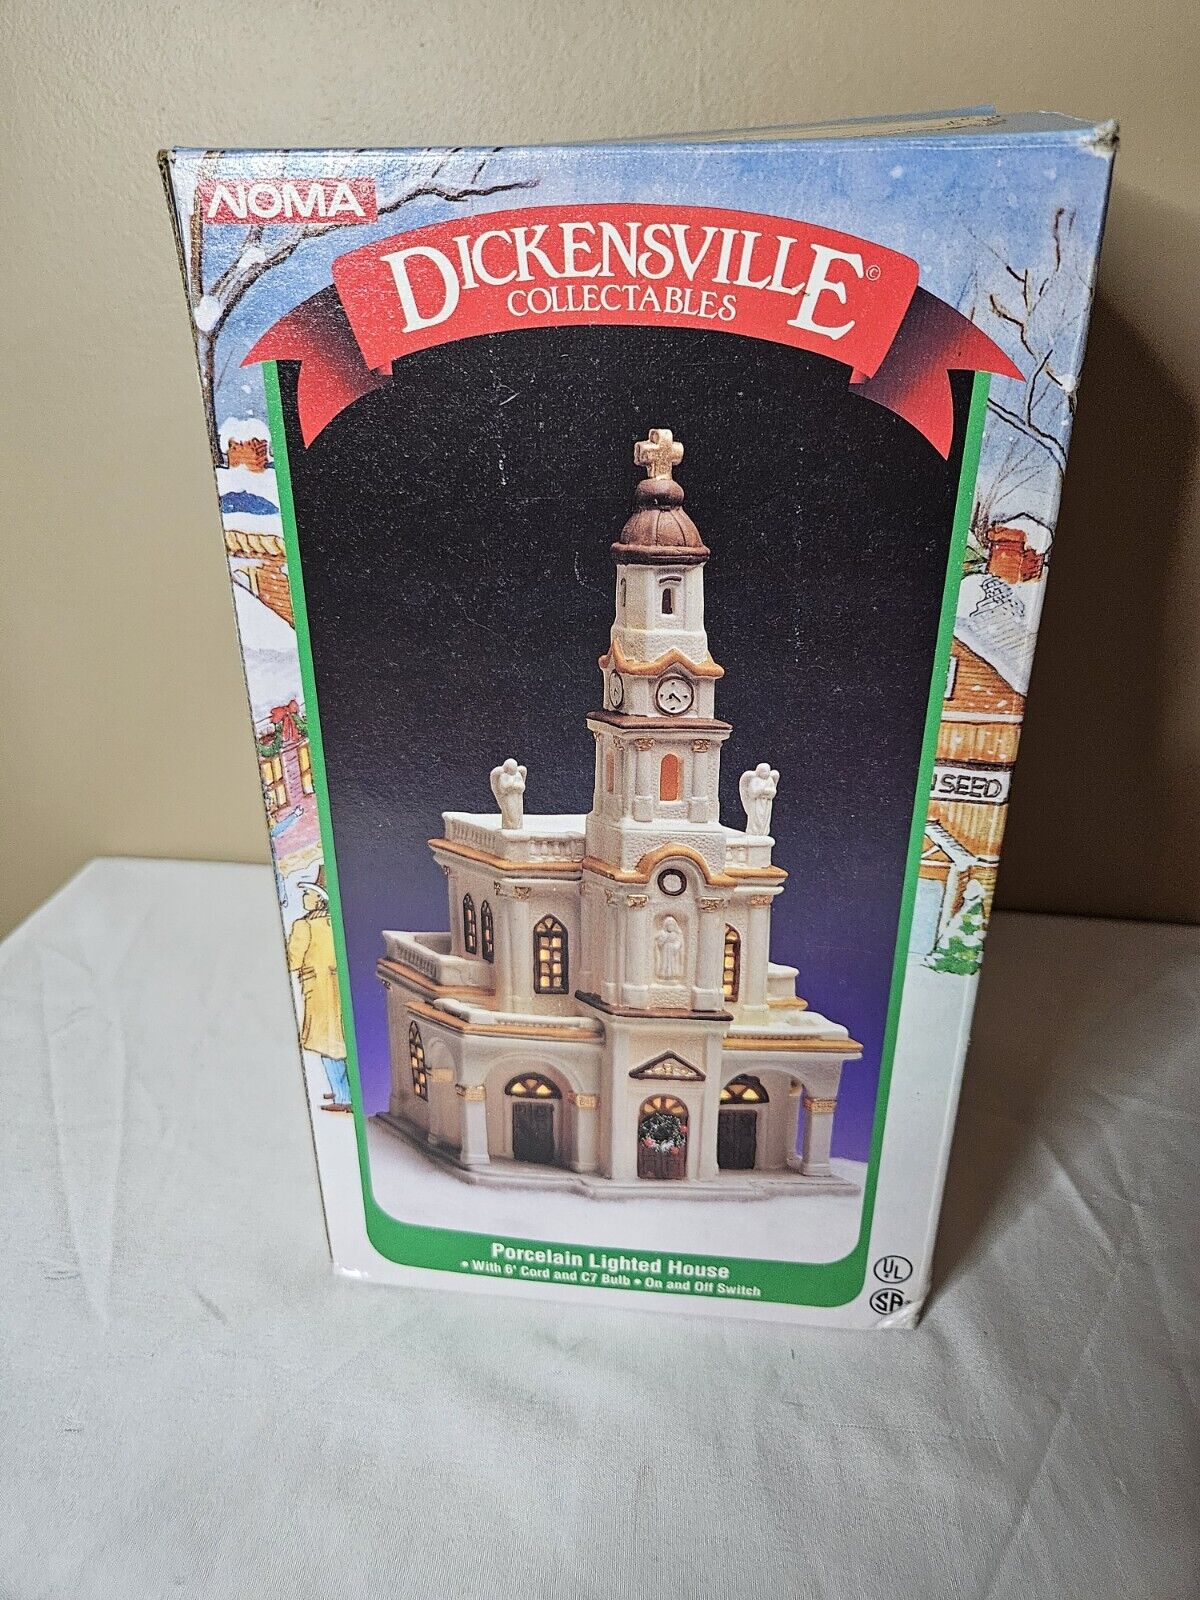 1995 Noma Dickensville Collectables Porcelain Lighted Church in original Box